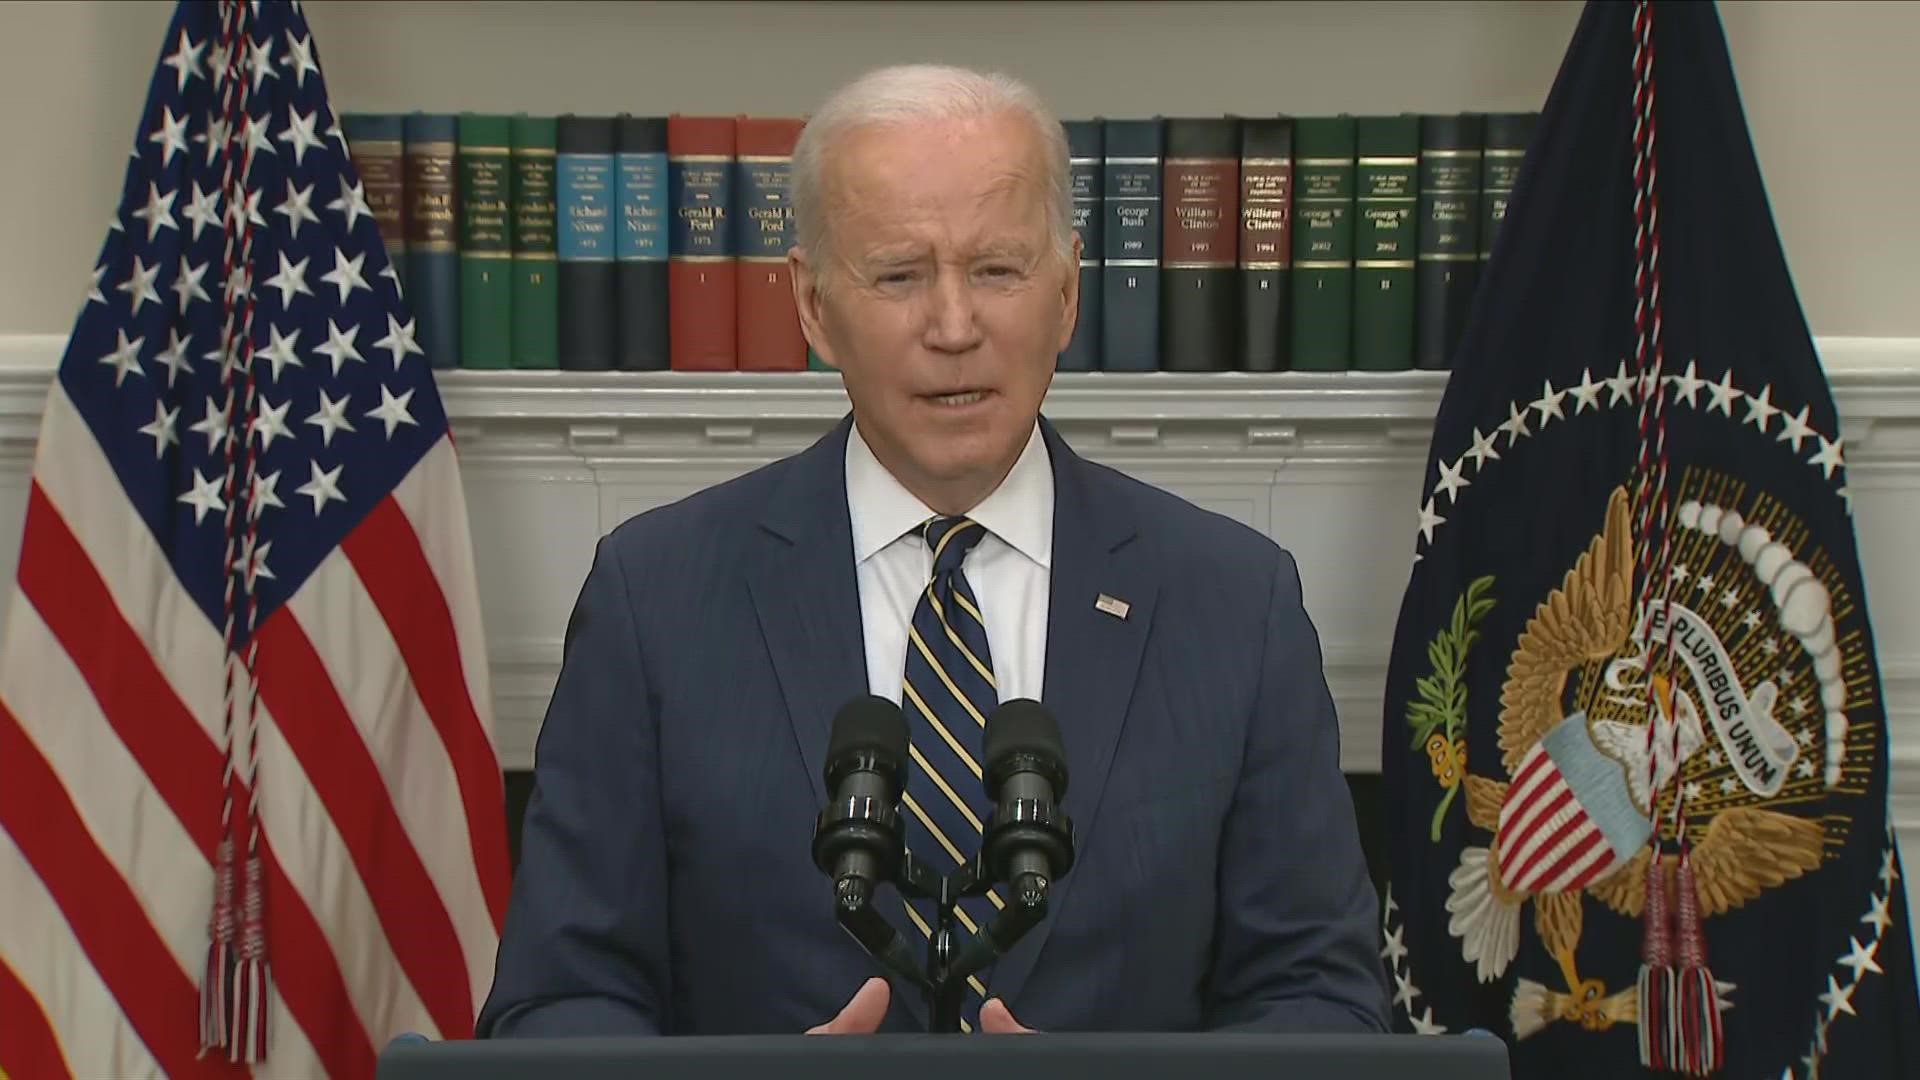 President Joe Biden said the US will only provide security aid to Ukraine and will refrain NATO from directly confronting Russia with force.